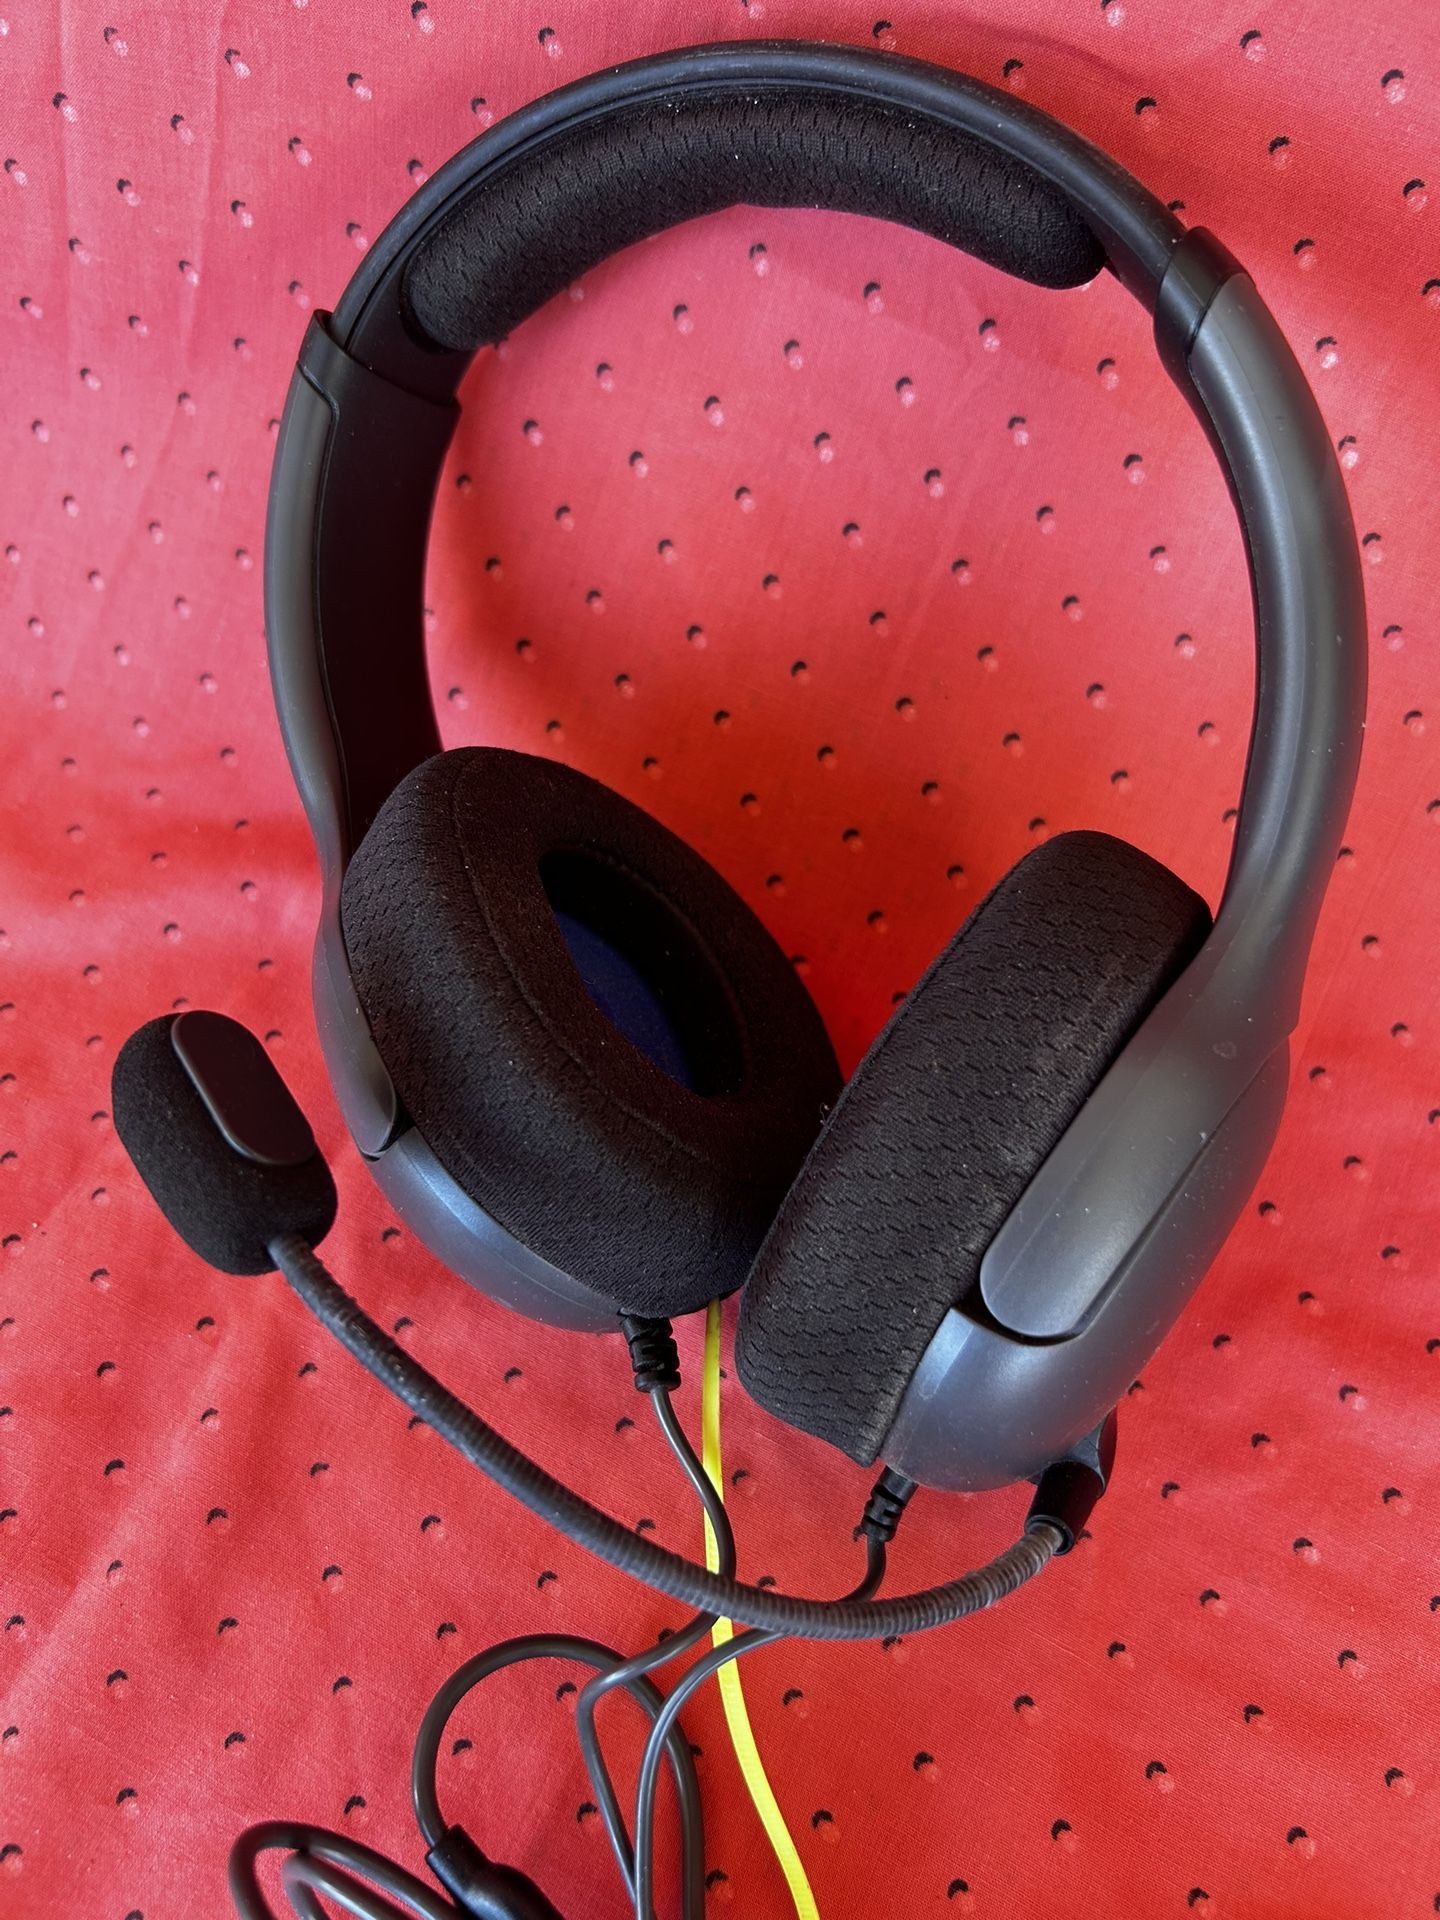 Ps4 PDP Lvl 40 Wired Headphones